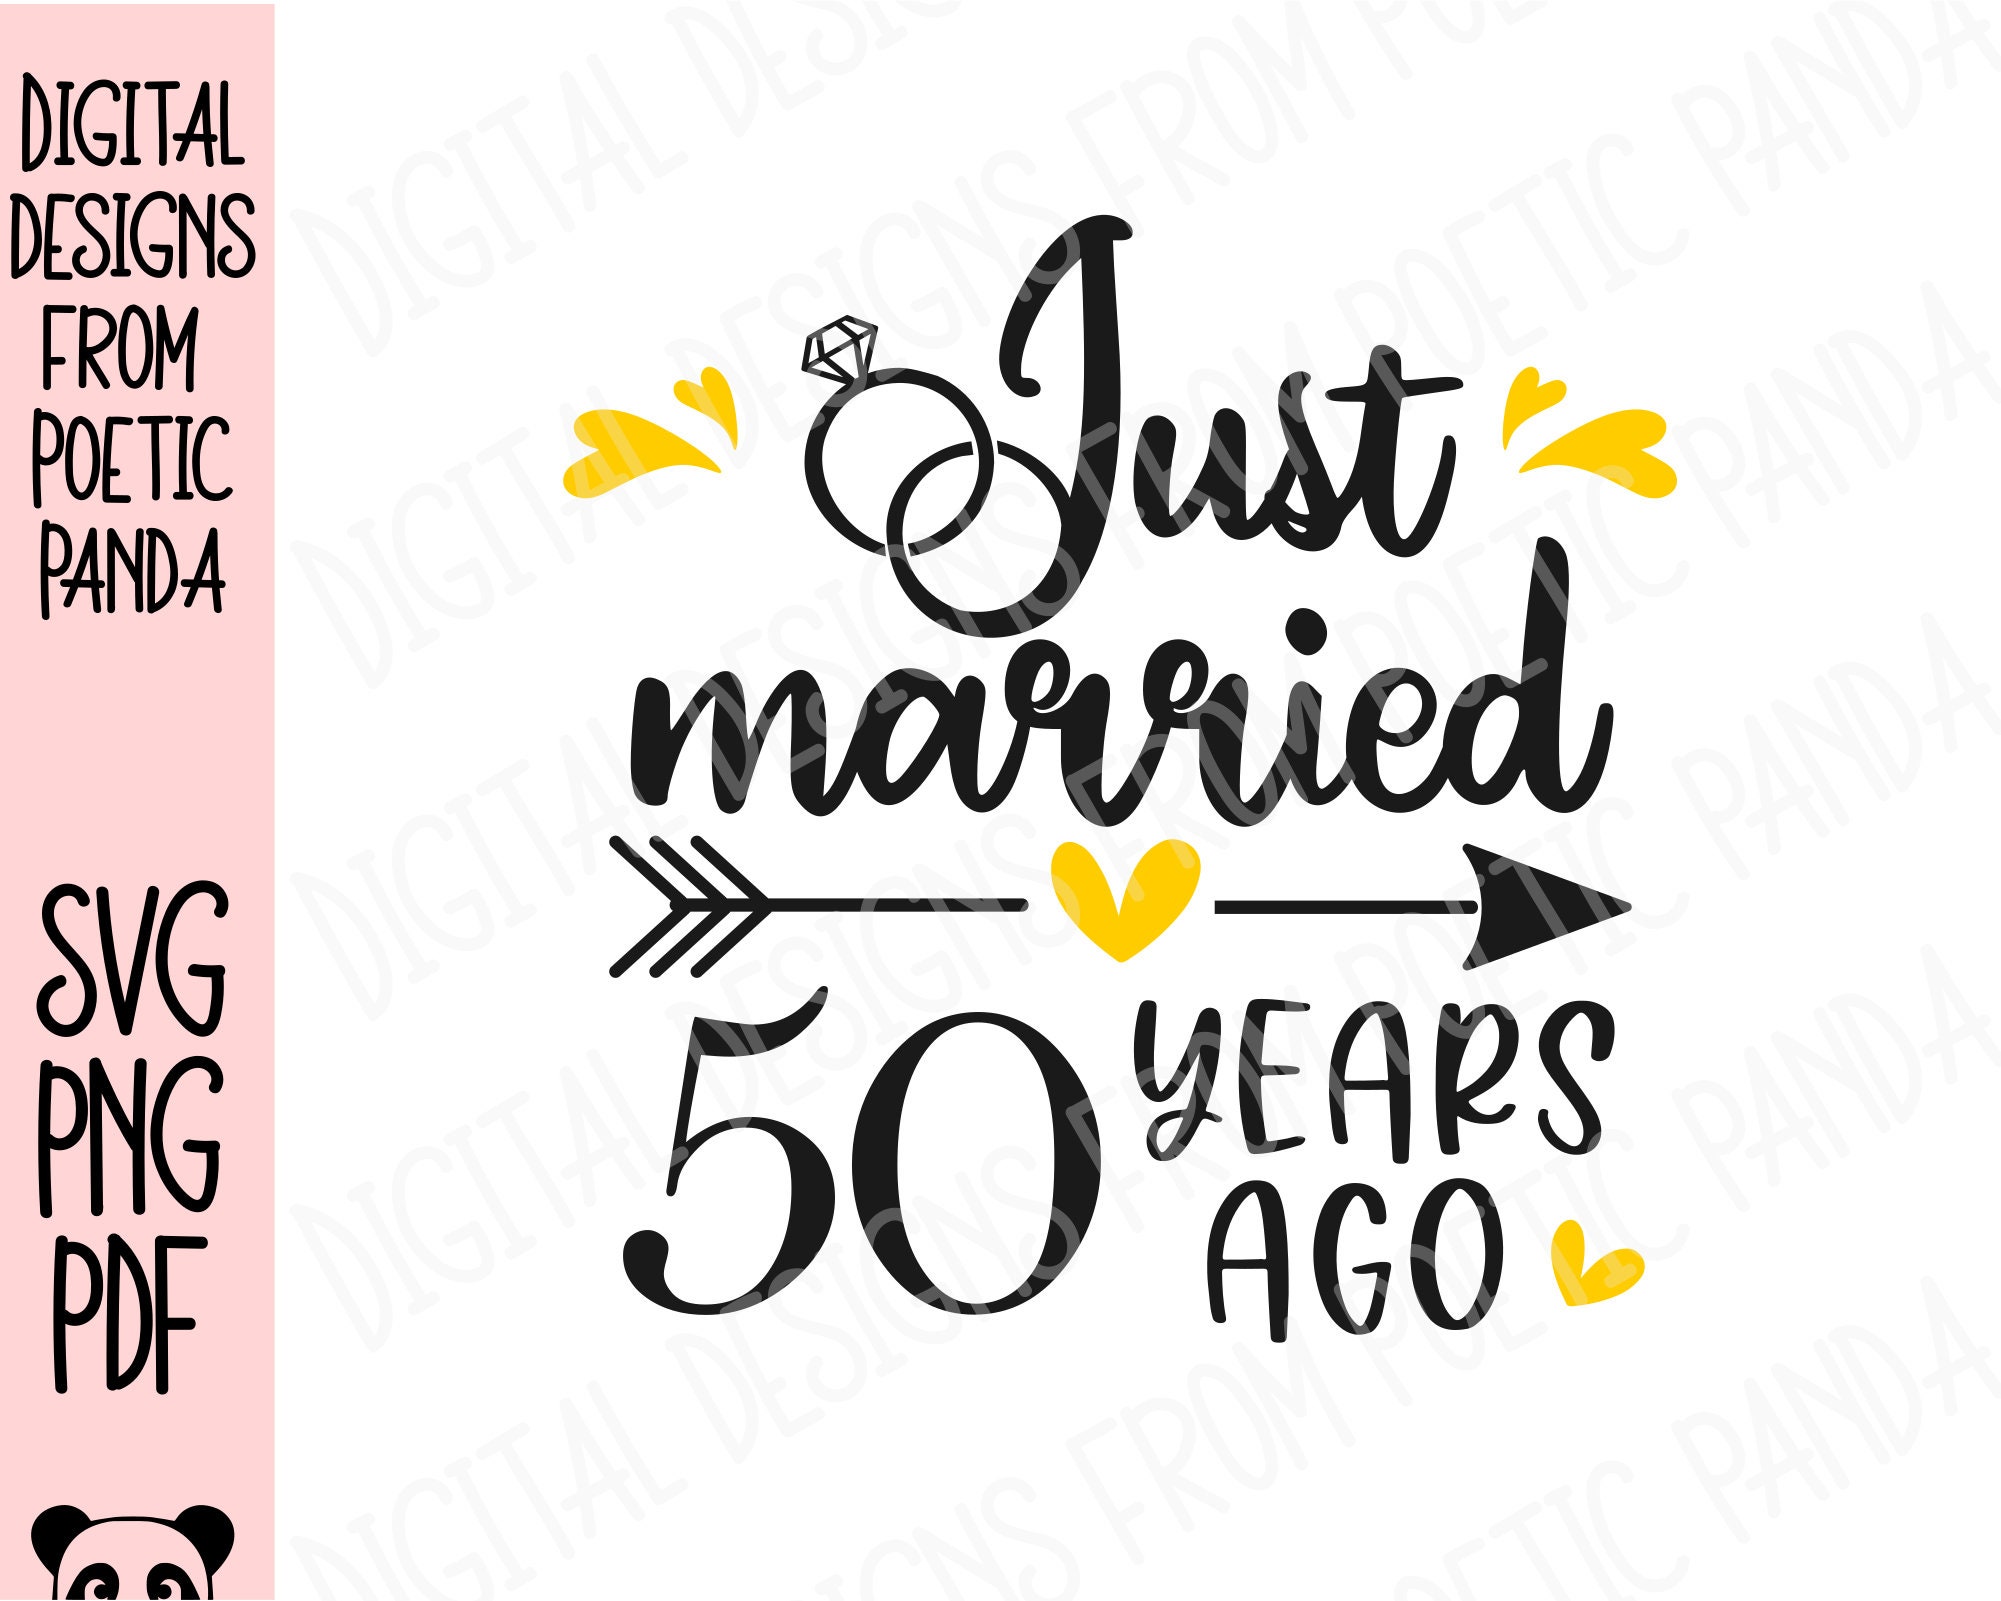 Just Married 50 Years Ago Svg Png Pdf 50th Wedding Etsy